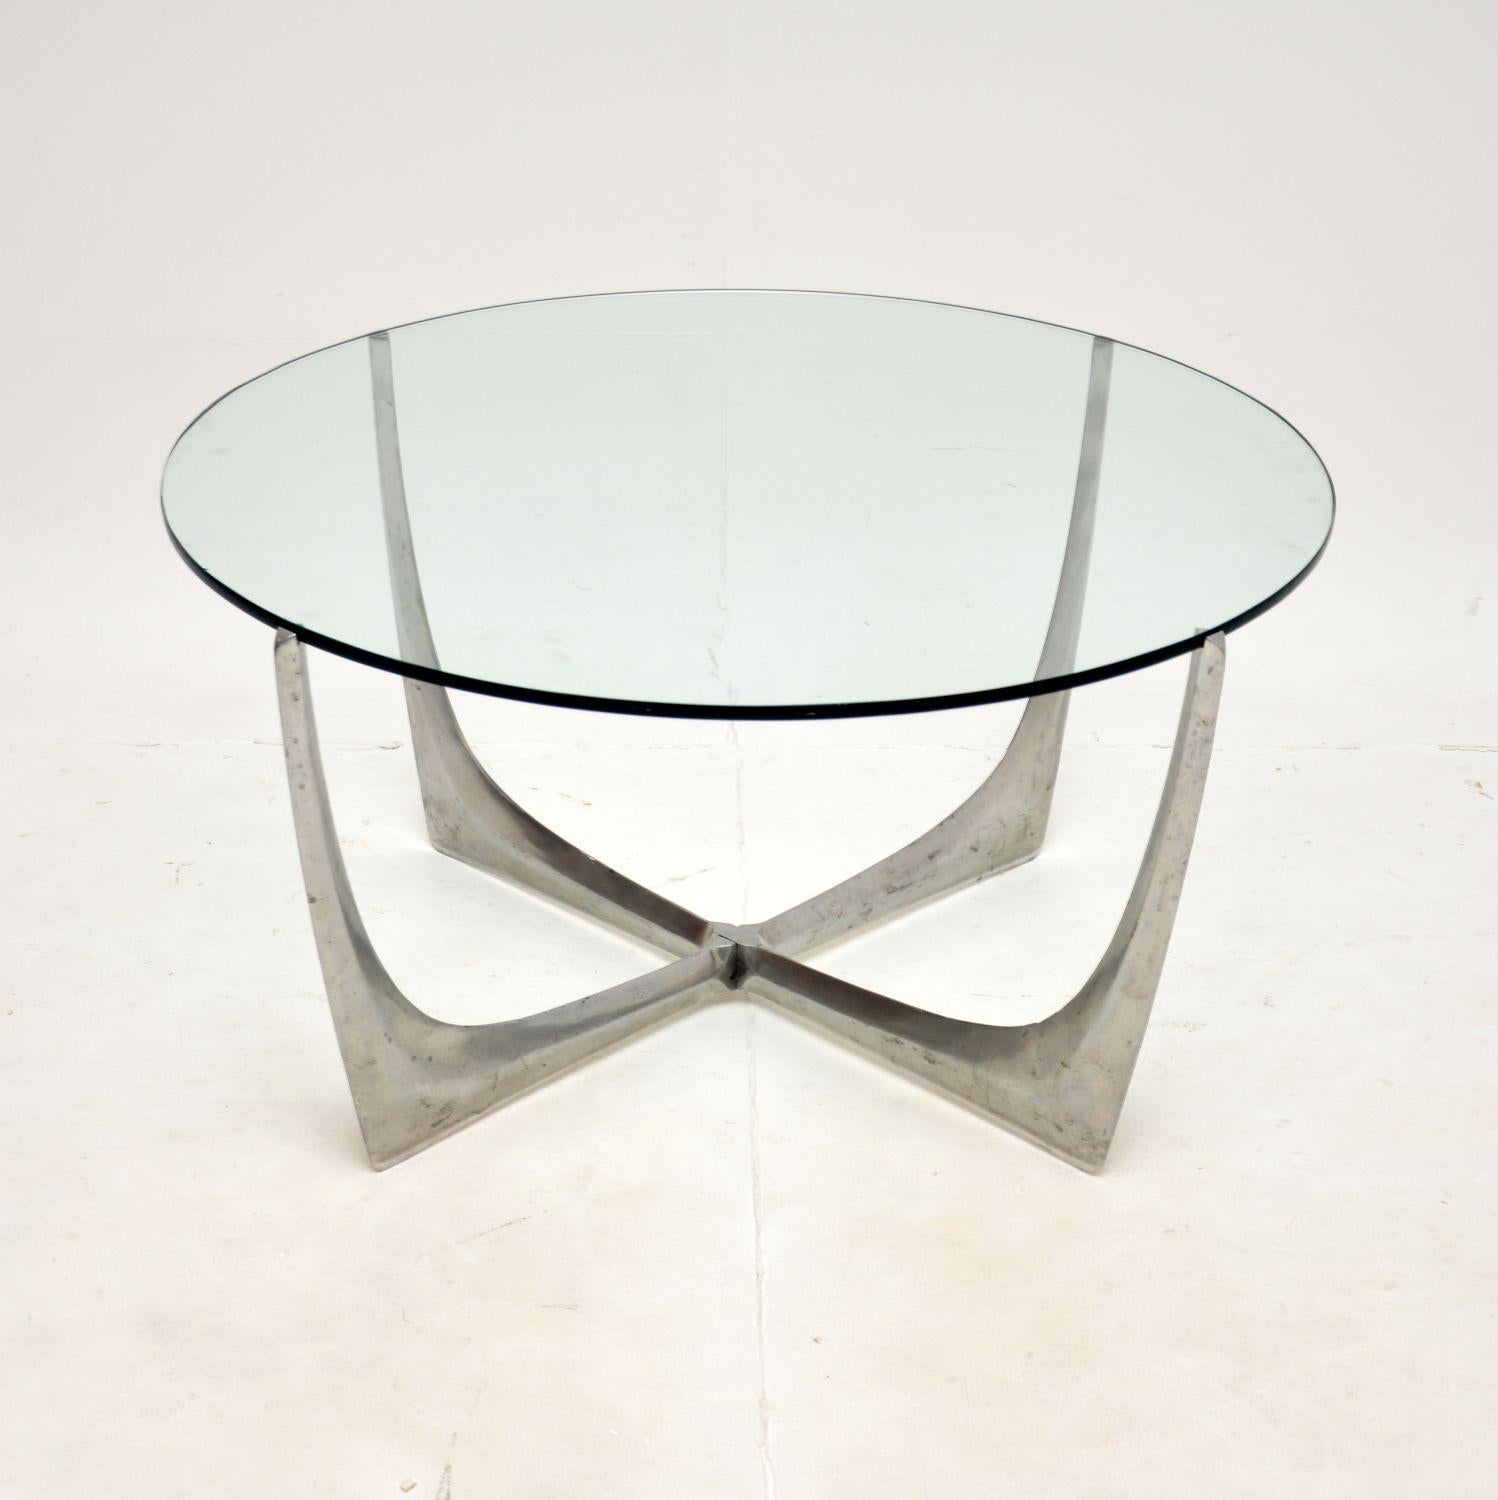 A very stylish and extremely well made vintage steel and glass coffee table by Knut Hesterberg. This was made in Germany, it dates from the 1960’s.

This is a very rare model, it has a stunning space age design and is of amazing quality. The steel